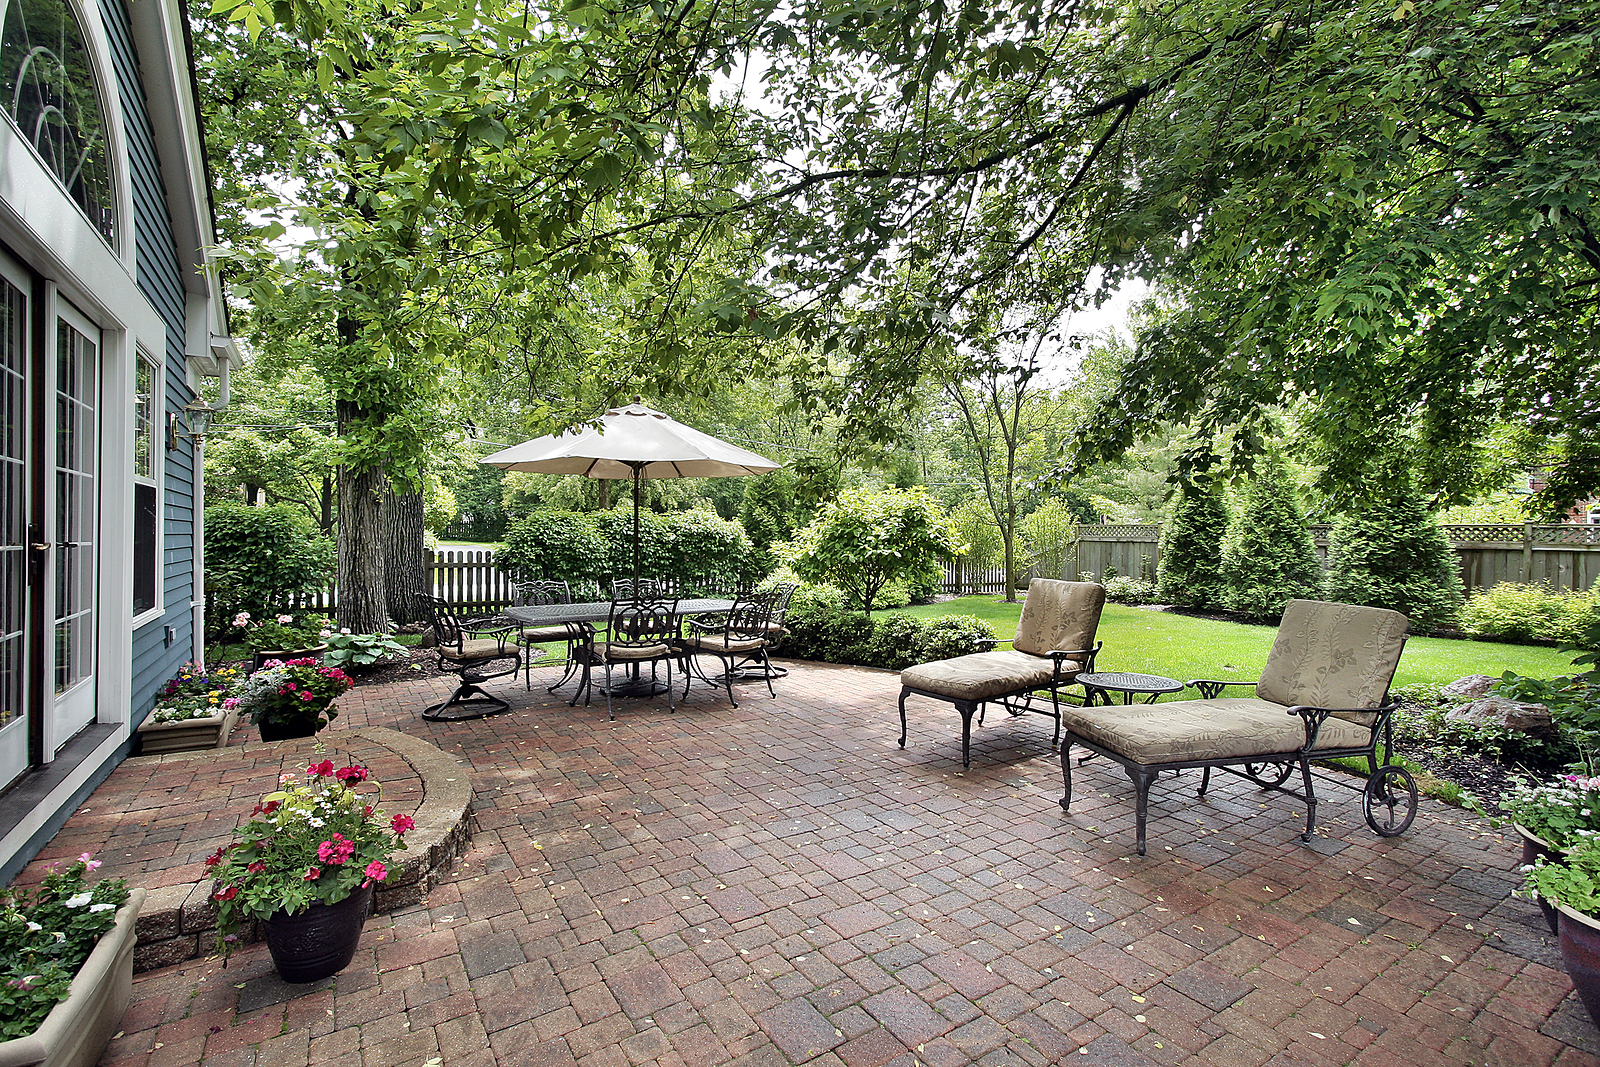 Summer Projects for Creating the Ultimate Backyard: Adding Shade